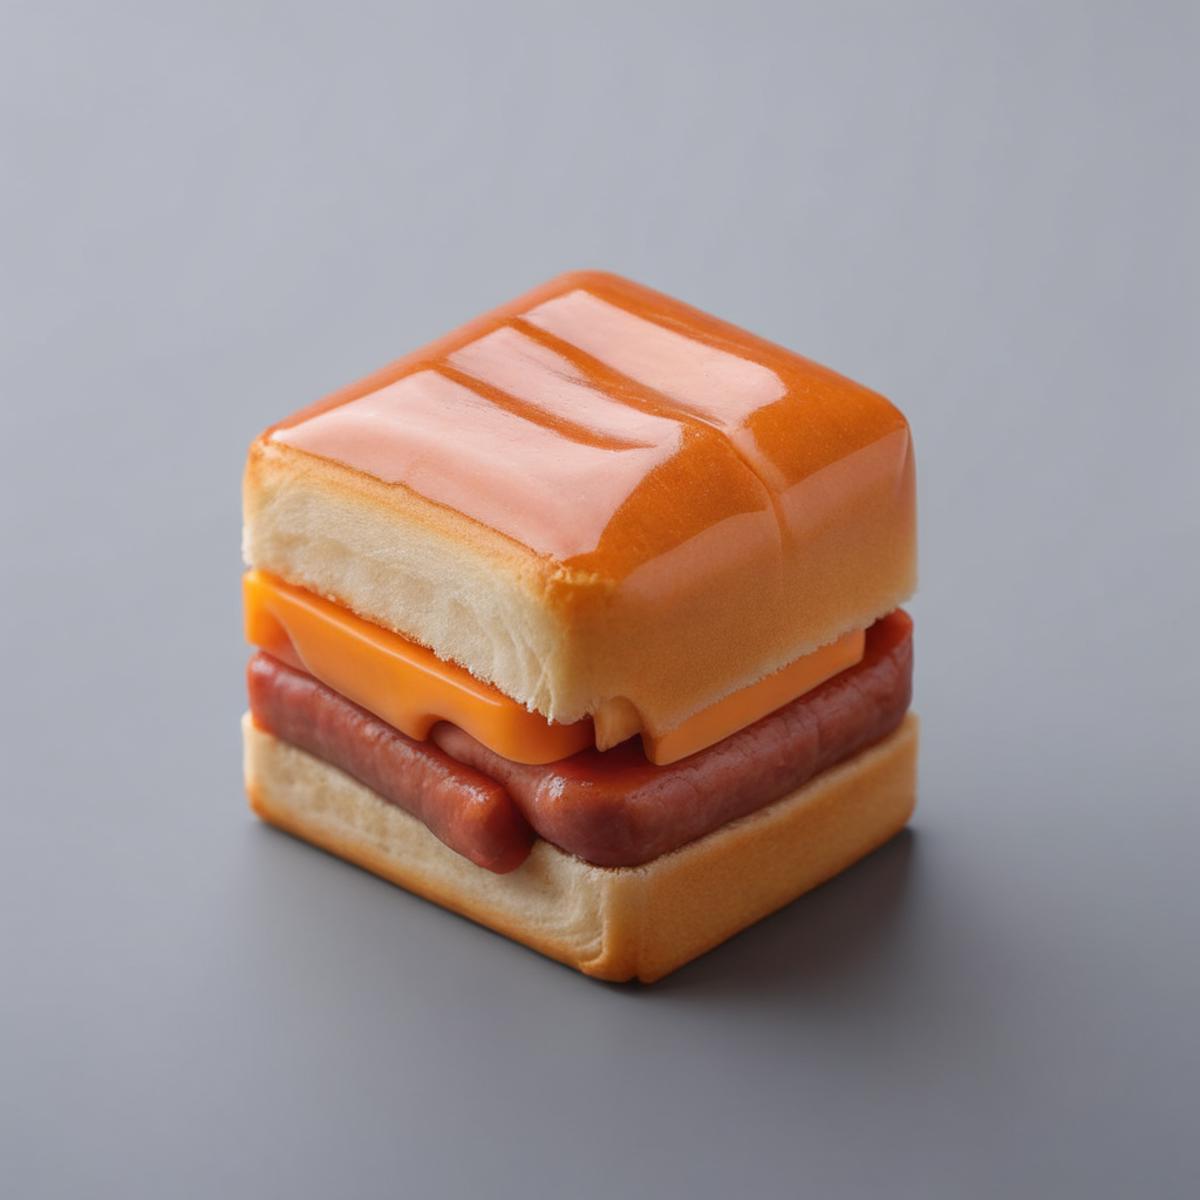 A tiny, plastic, orange-colored sandwich with a hot dog and cheese slice inside, sitting on a gray surface.